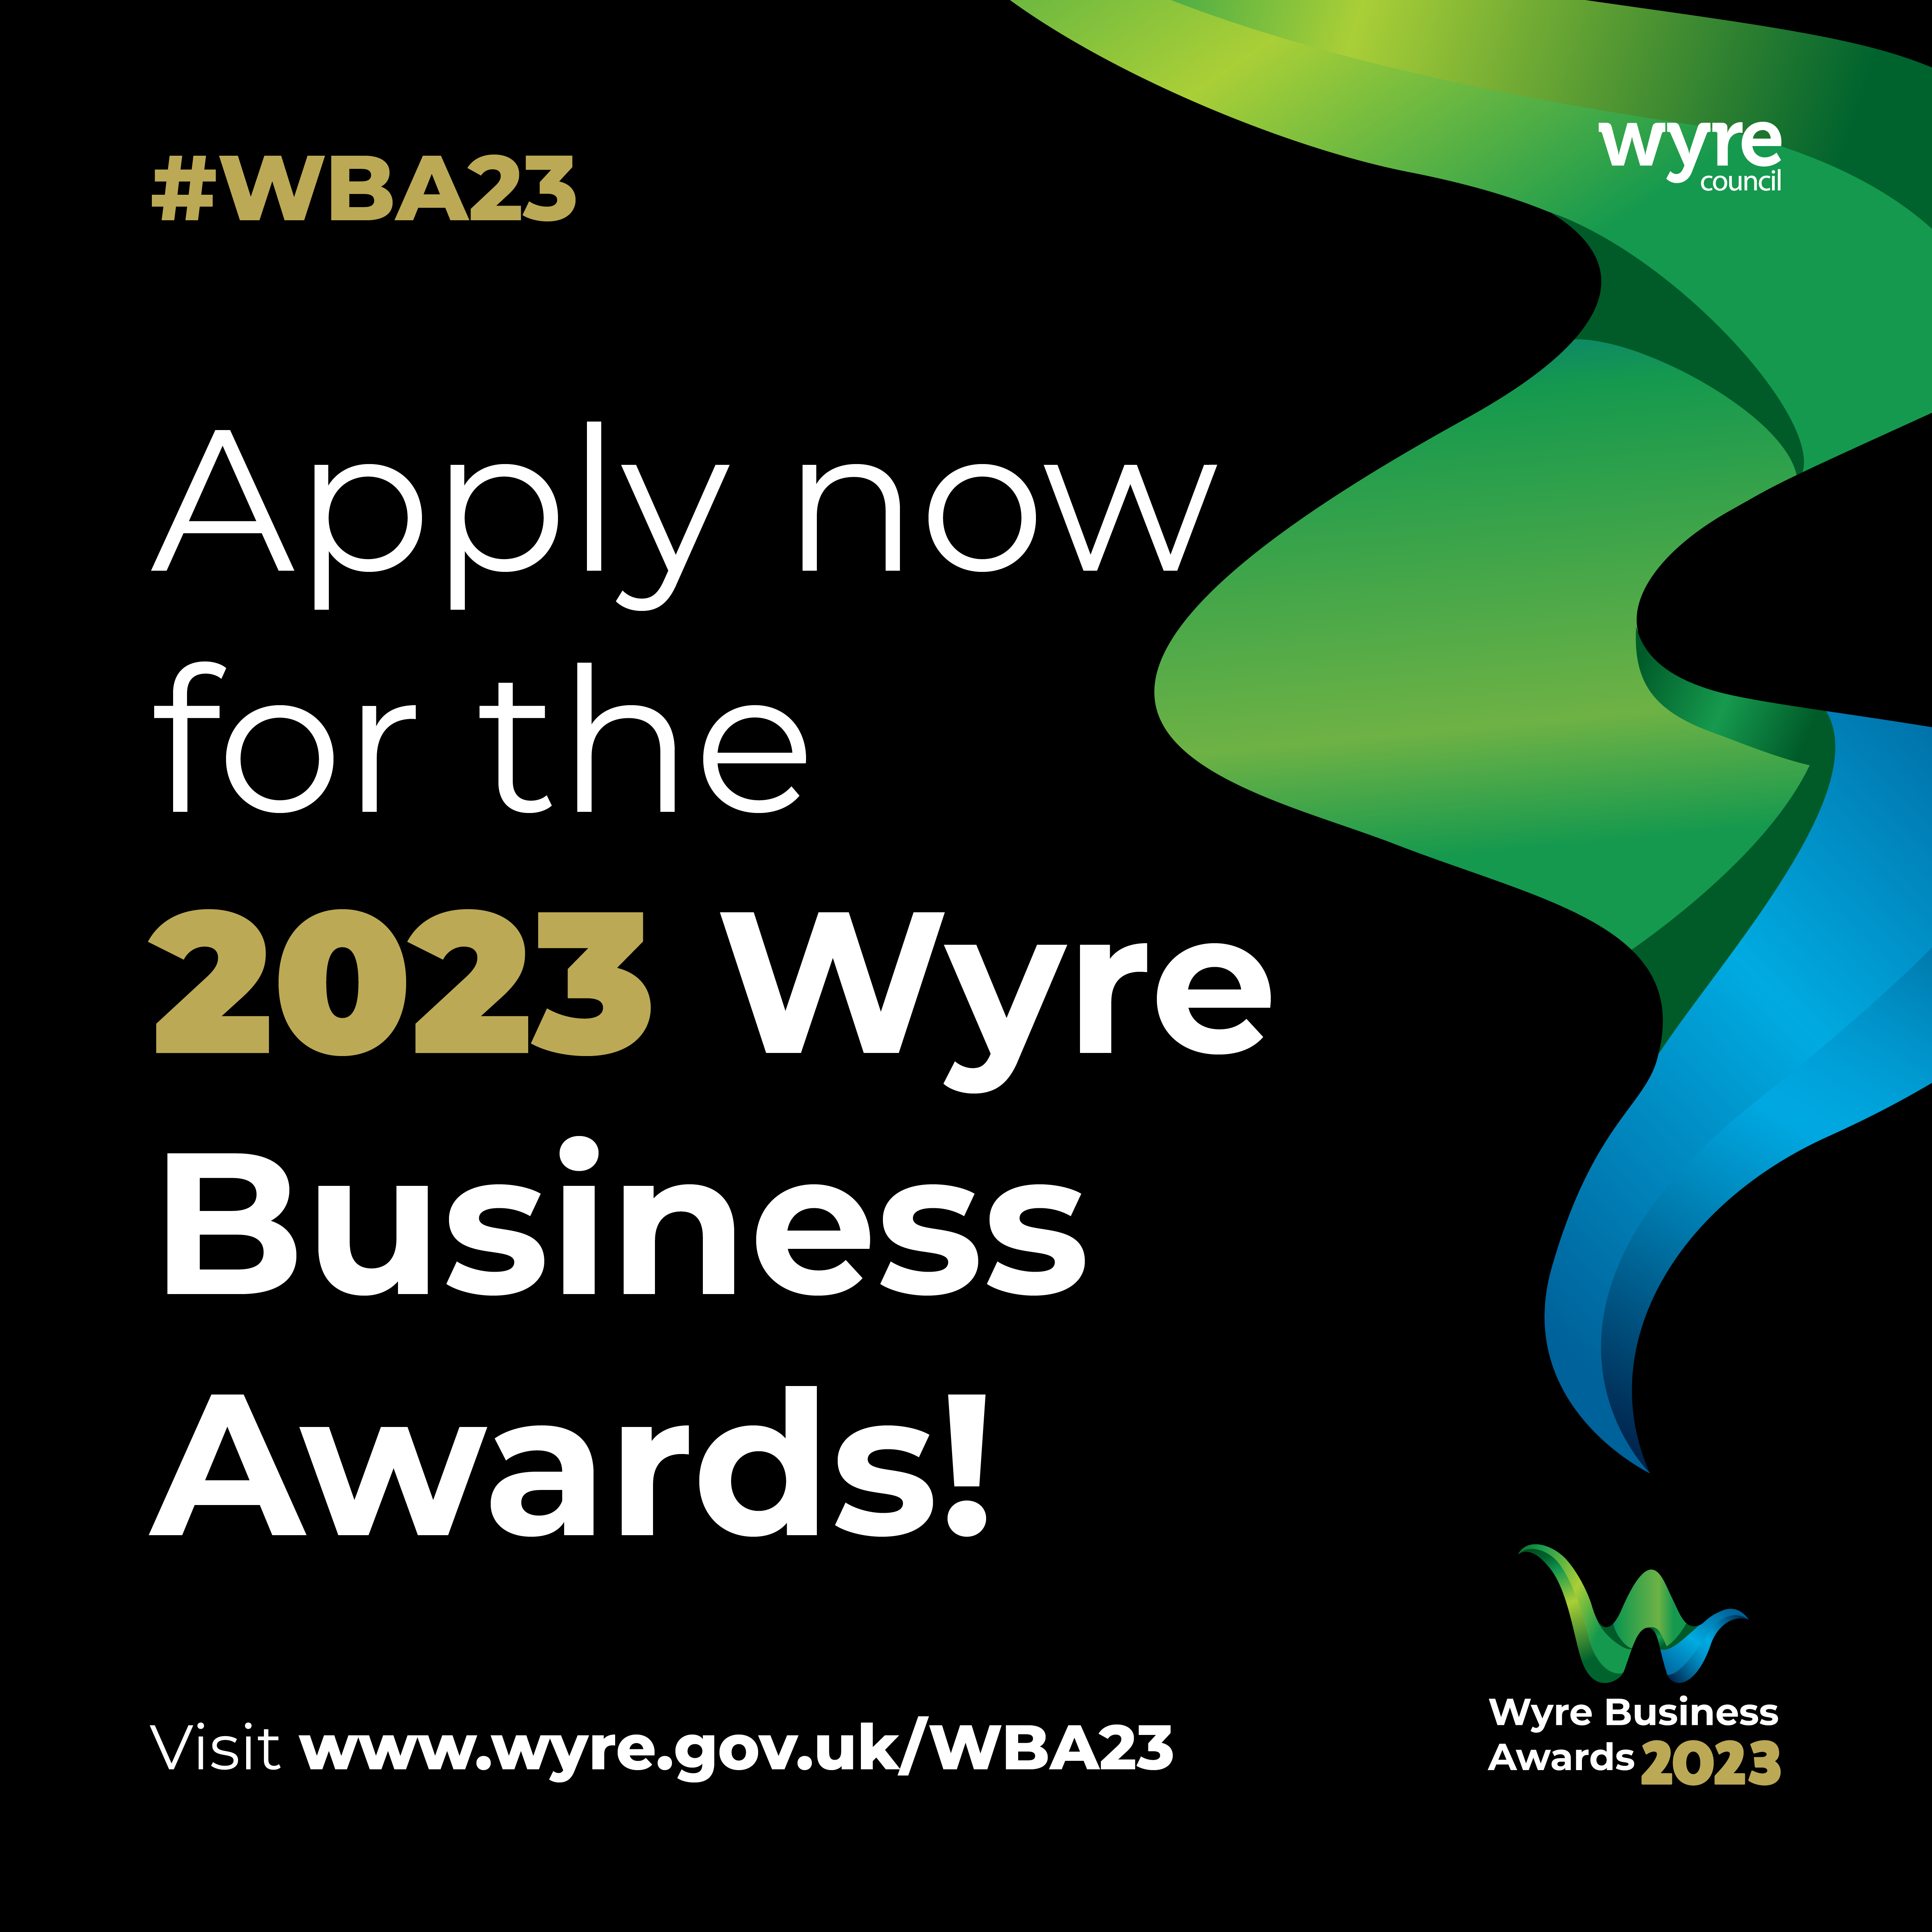 Wyre Business Awards 2023